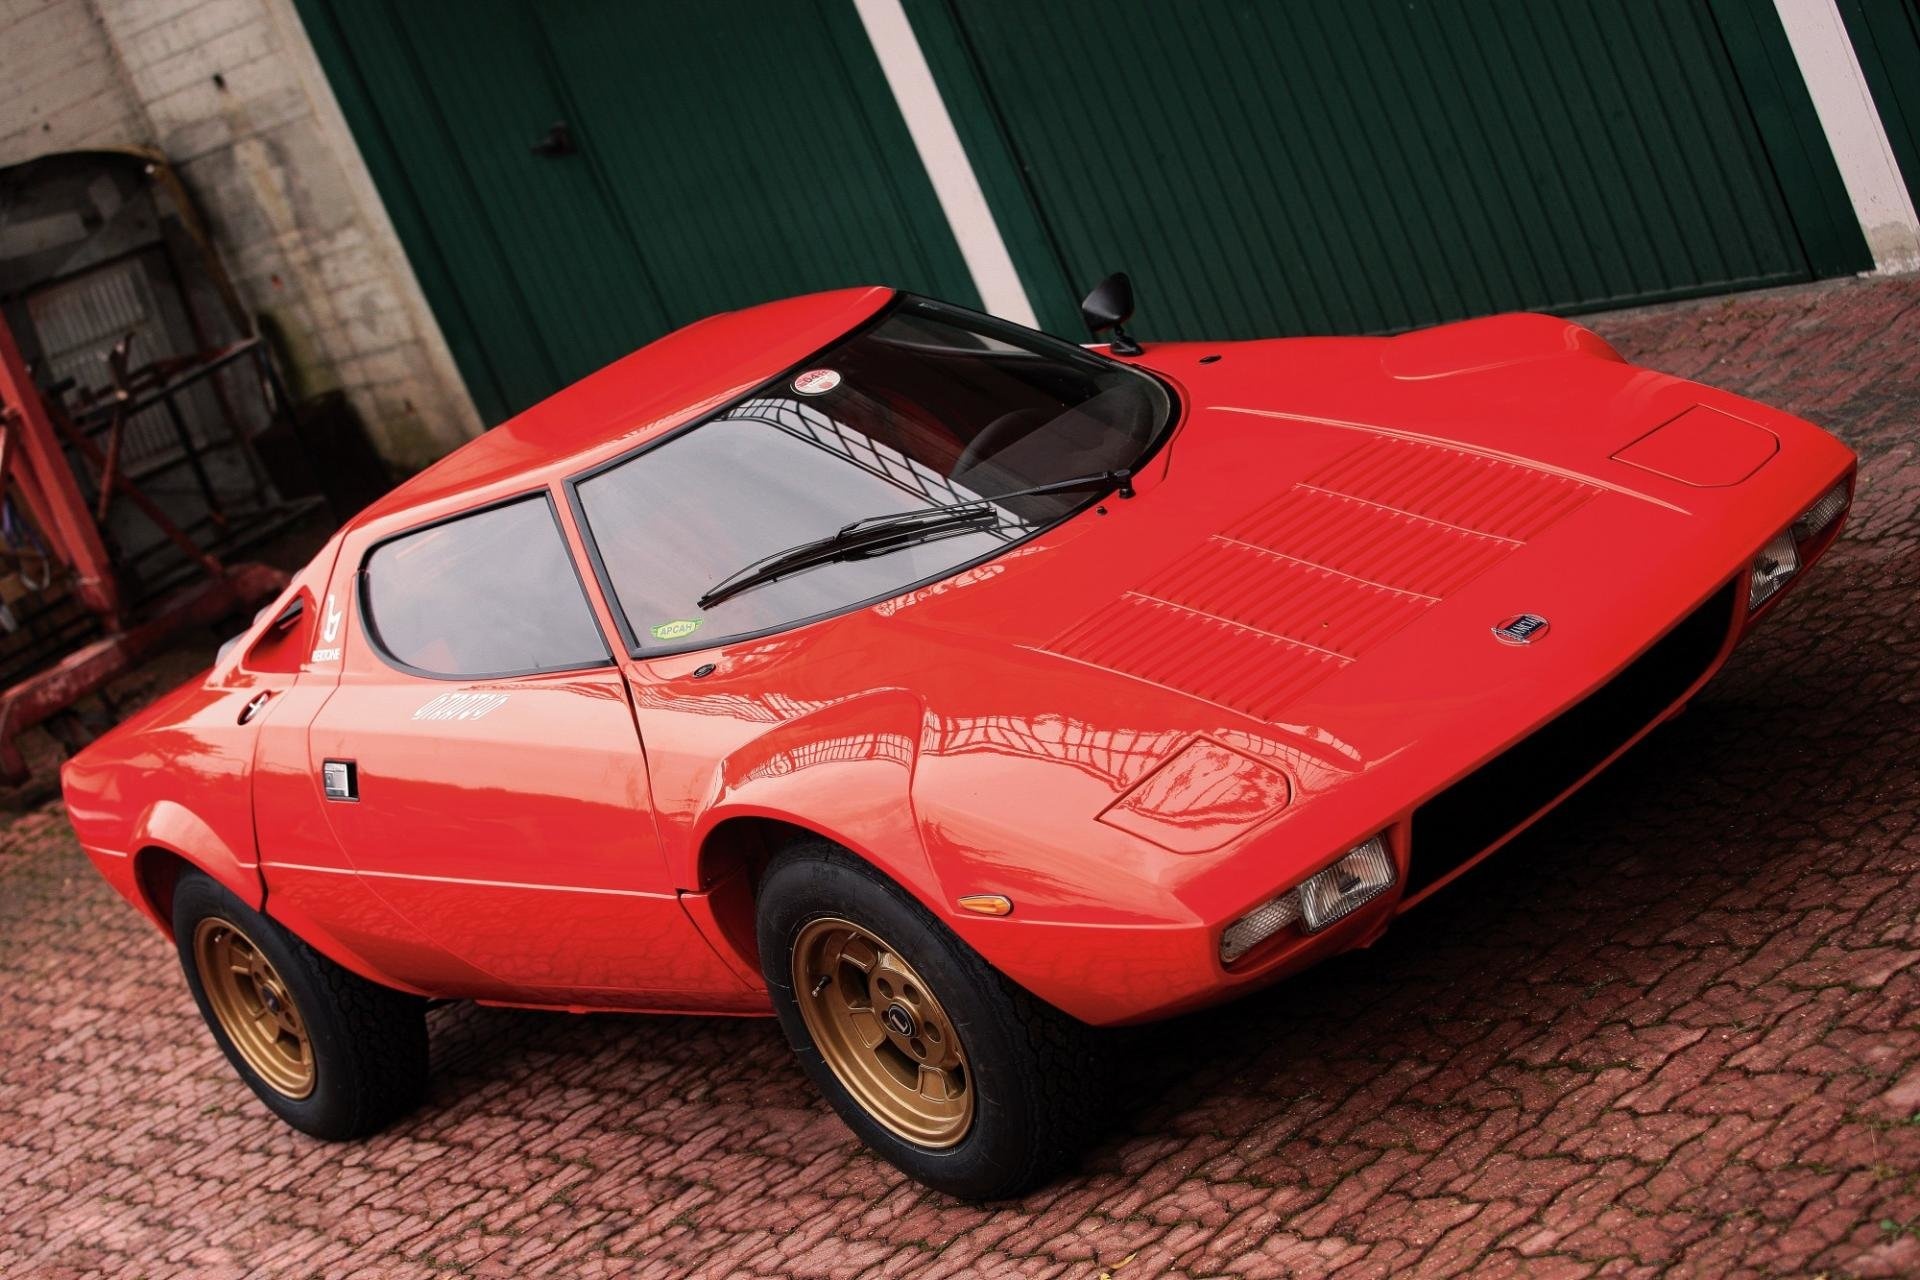 Lancia Stratos wallpapers HD, High-resolution images, Automotive beauty, 1920x1280 HD Desktop